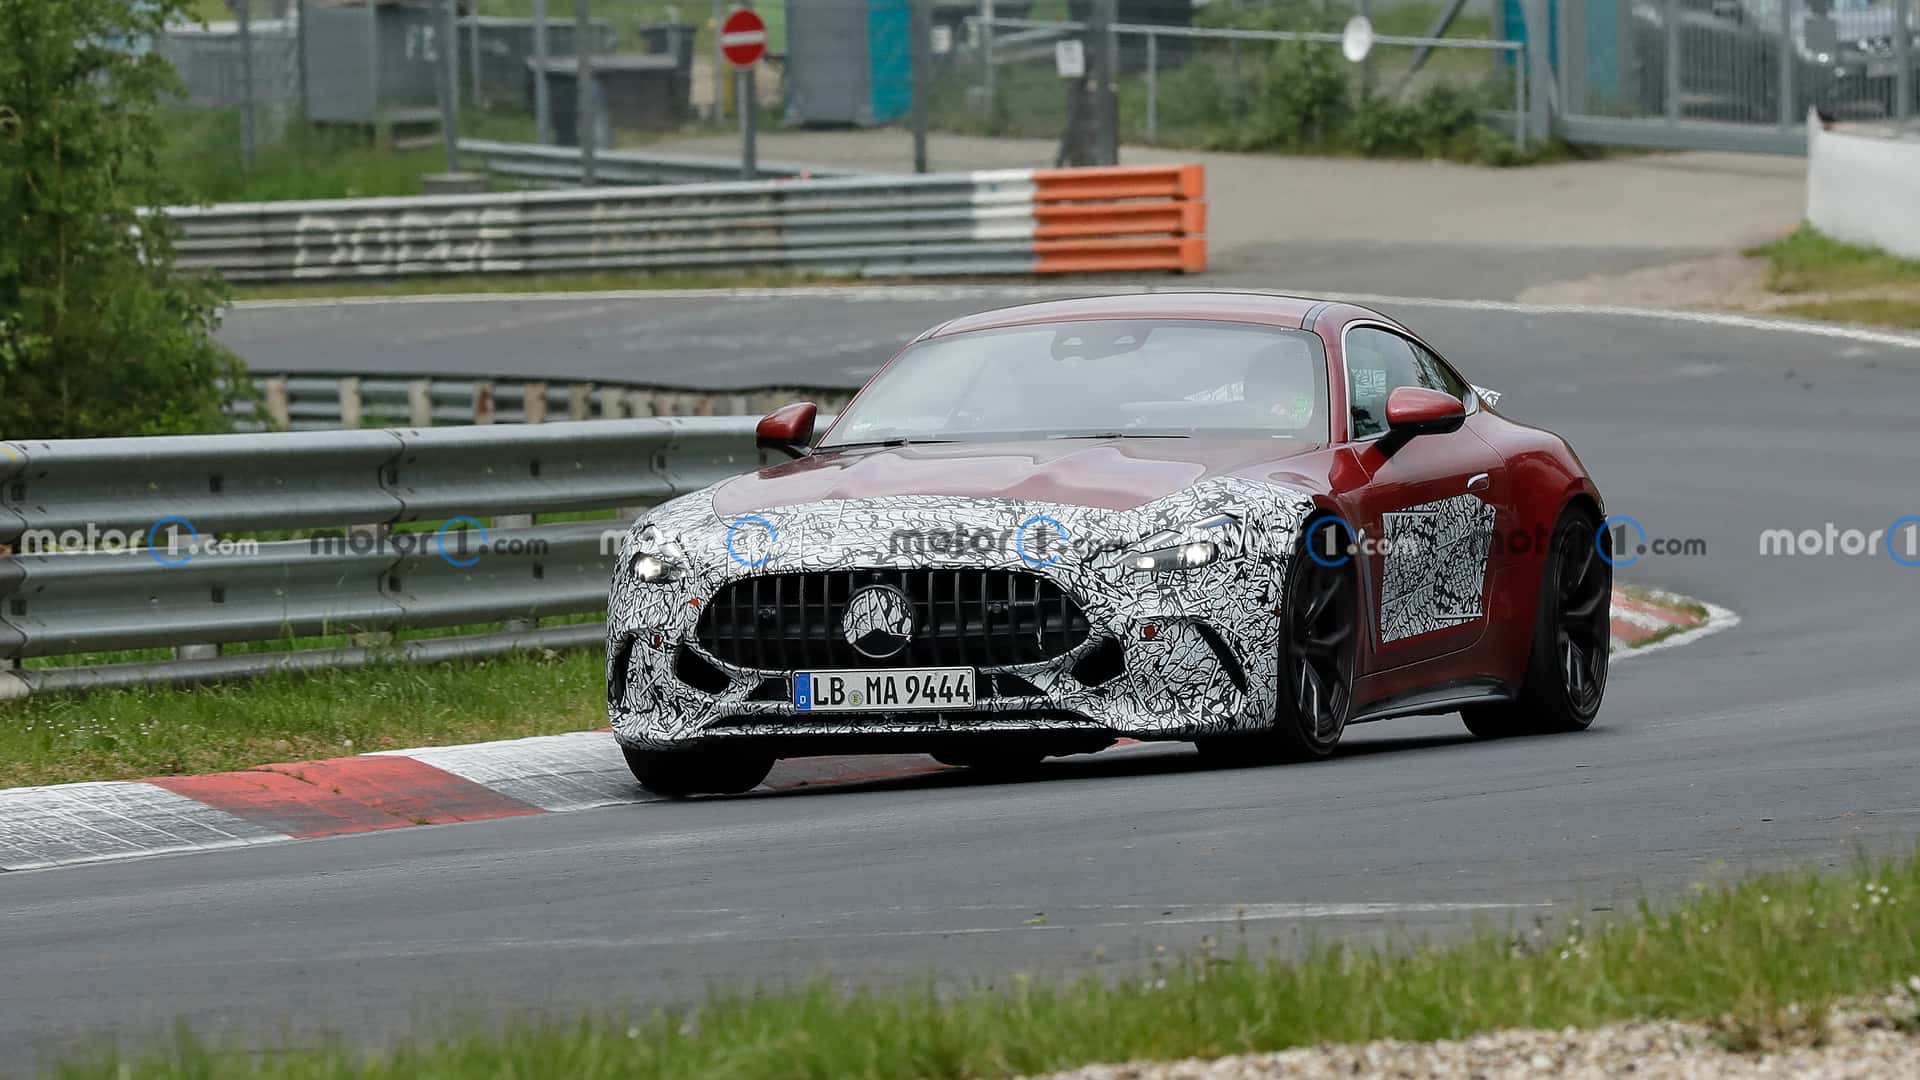 2024-mercedes-amg-gt-coupe-front-view-spy-photo.jpg